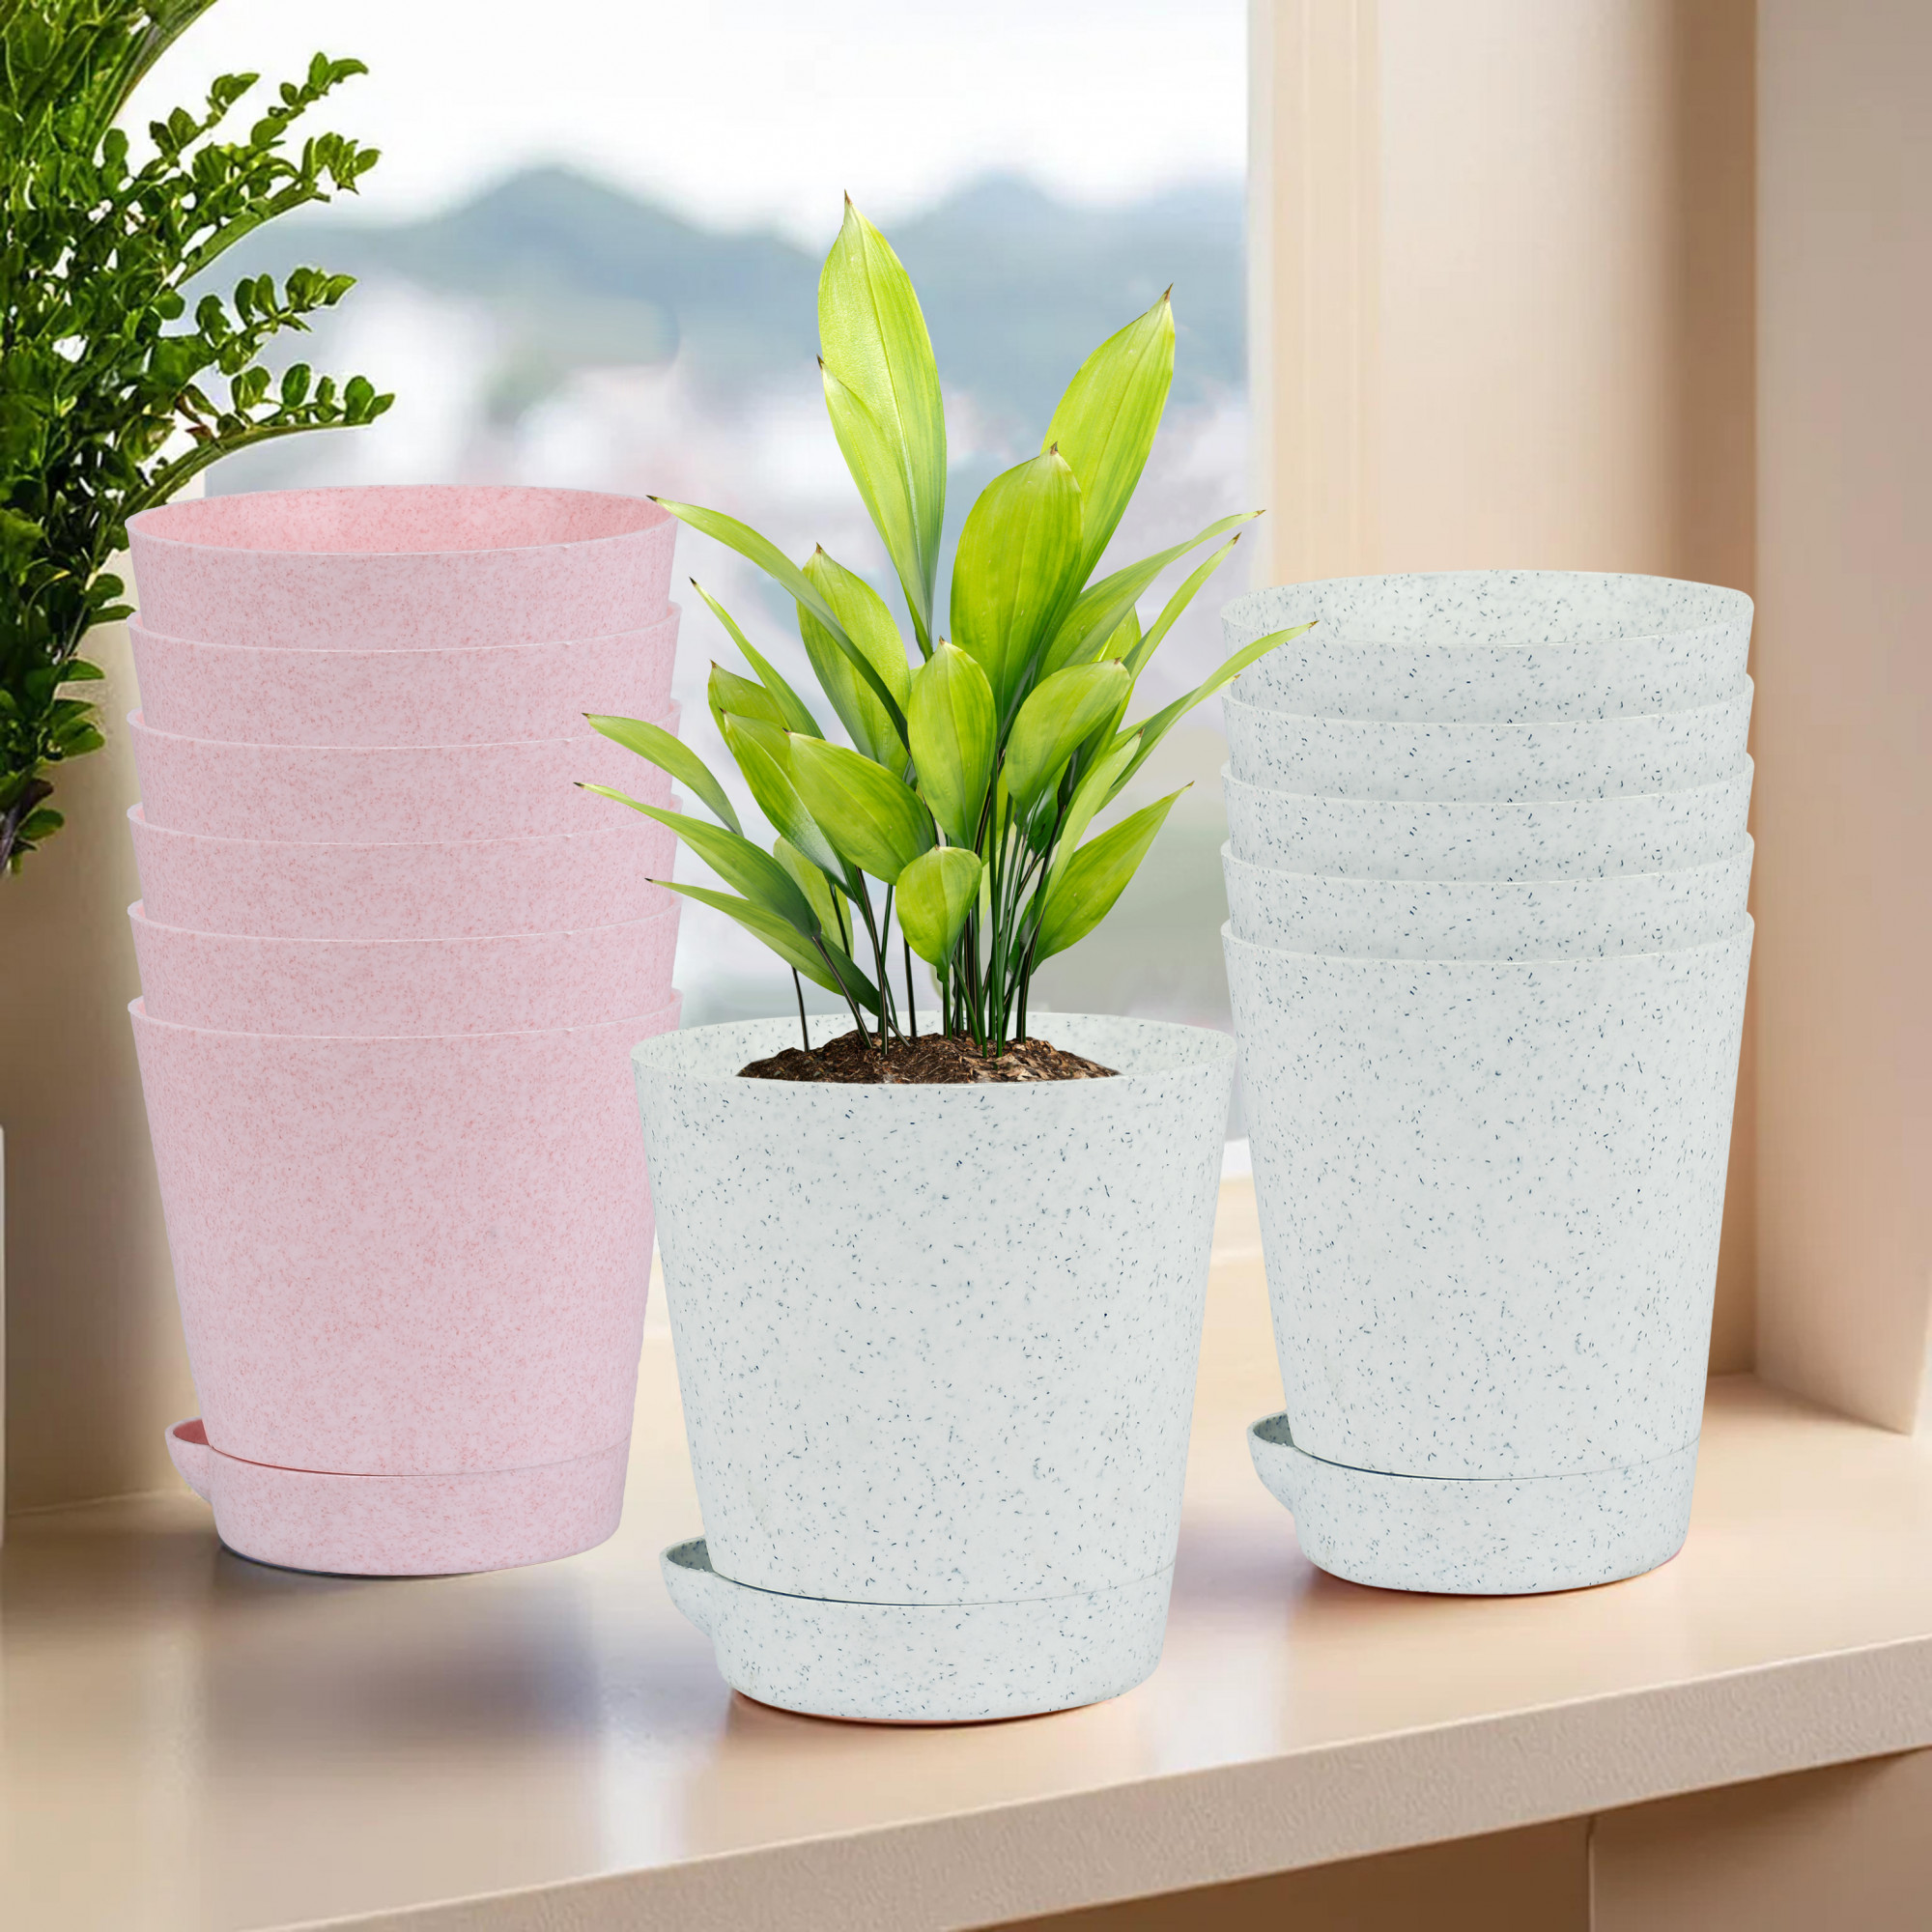 Kuber Industries Flower Pot | Flower Pot for Living Room-Office | Planters for Home-office-Lawns & Garden Décor | Self Watering Flower Planters Pots | Marble Titan | 4 Inch | White & Pink